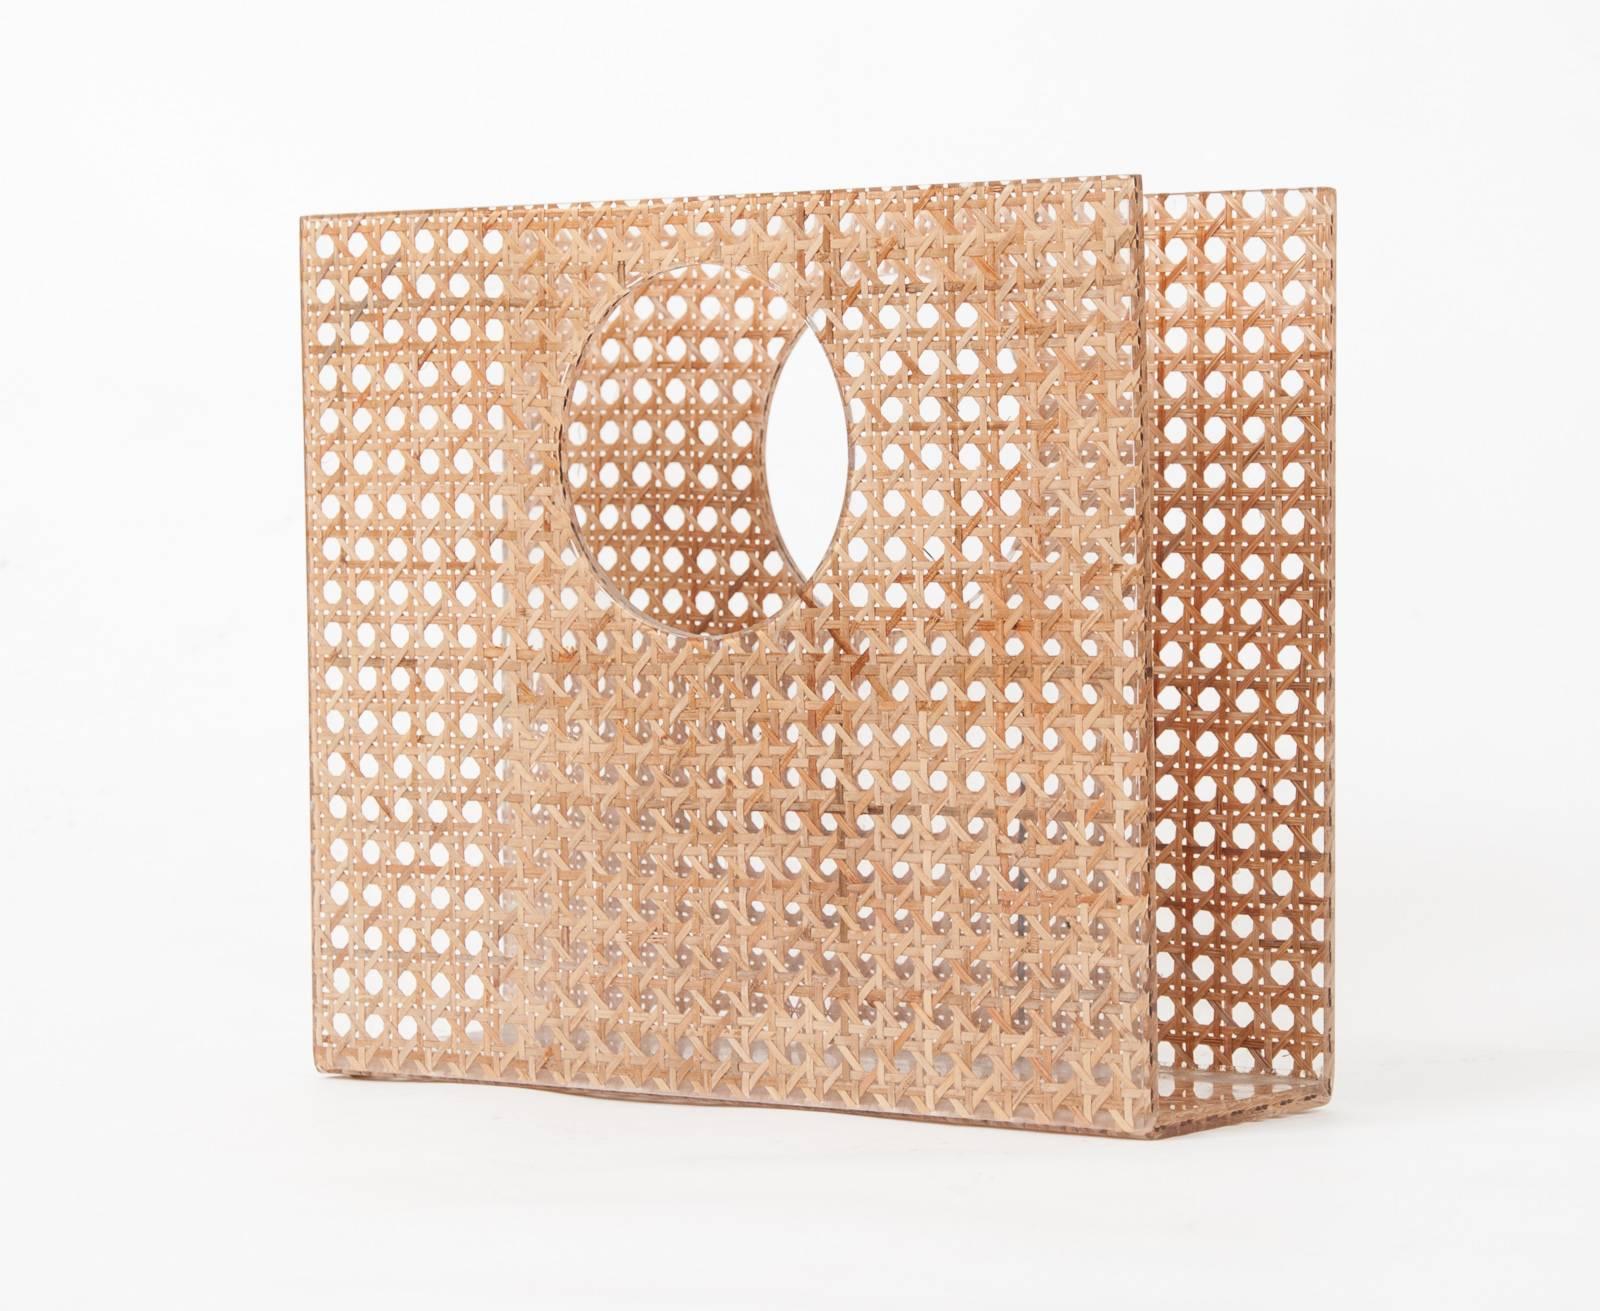 Rattan Christian Dior Home Attributed Lucite and Cane Magazine Holder